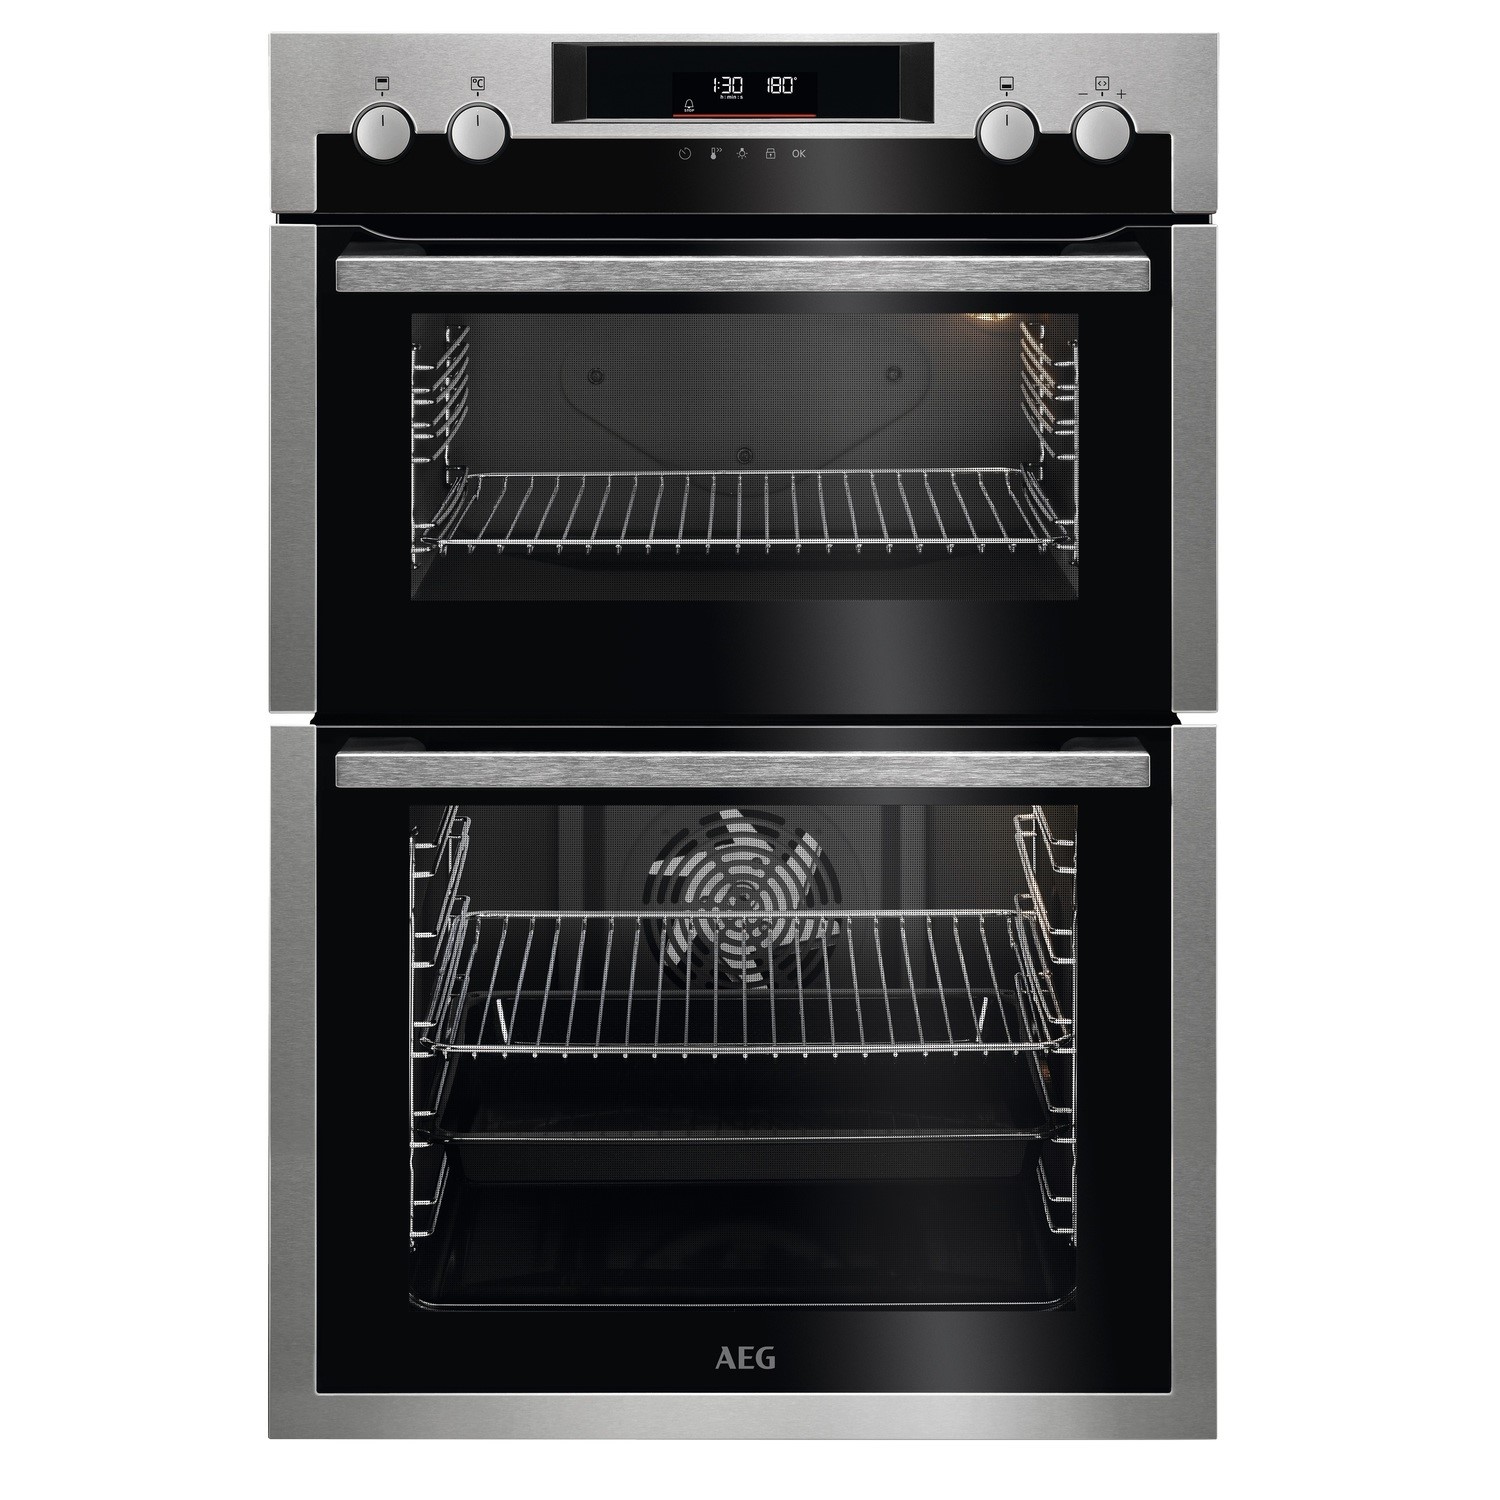 Photos - Oven AEG 6000 Series Built-In Double  - Stainless Steel DCS531160M 